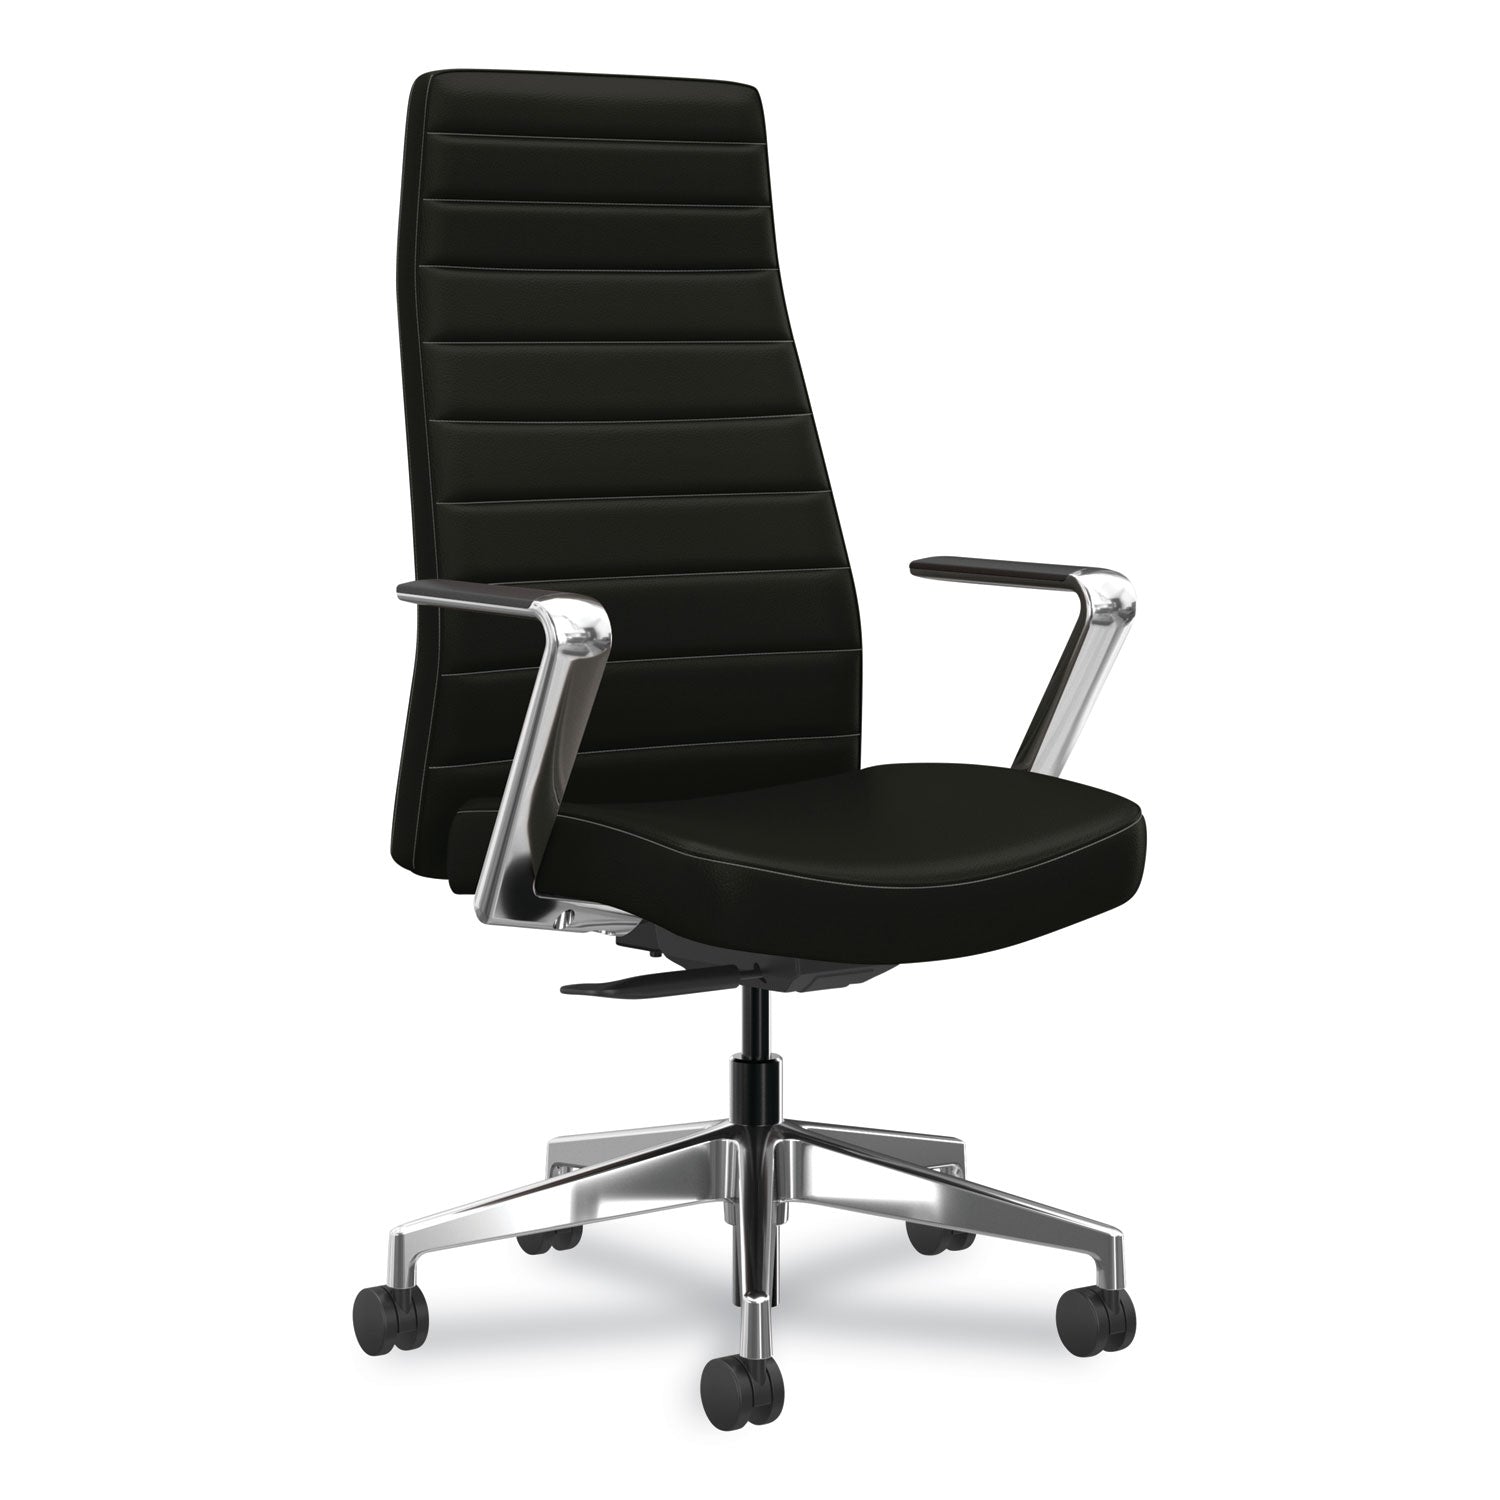 cofi-executive-high-back-chair-supports-up-to-300-lb-155-to-205-seat-height-black-seat-back-polished-aluminum-base_honceuw0pu10c9p - 1